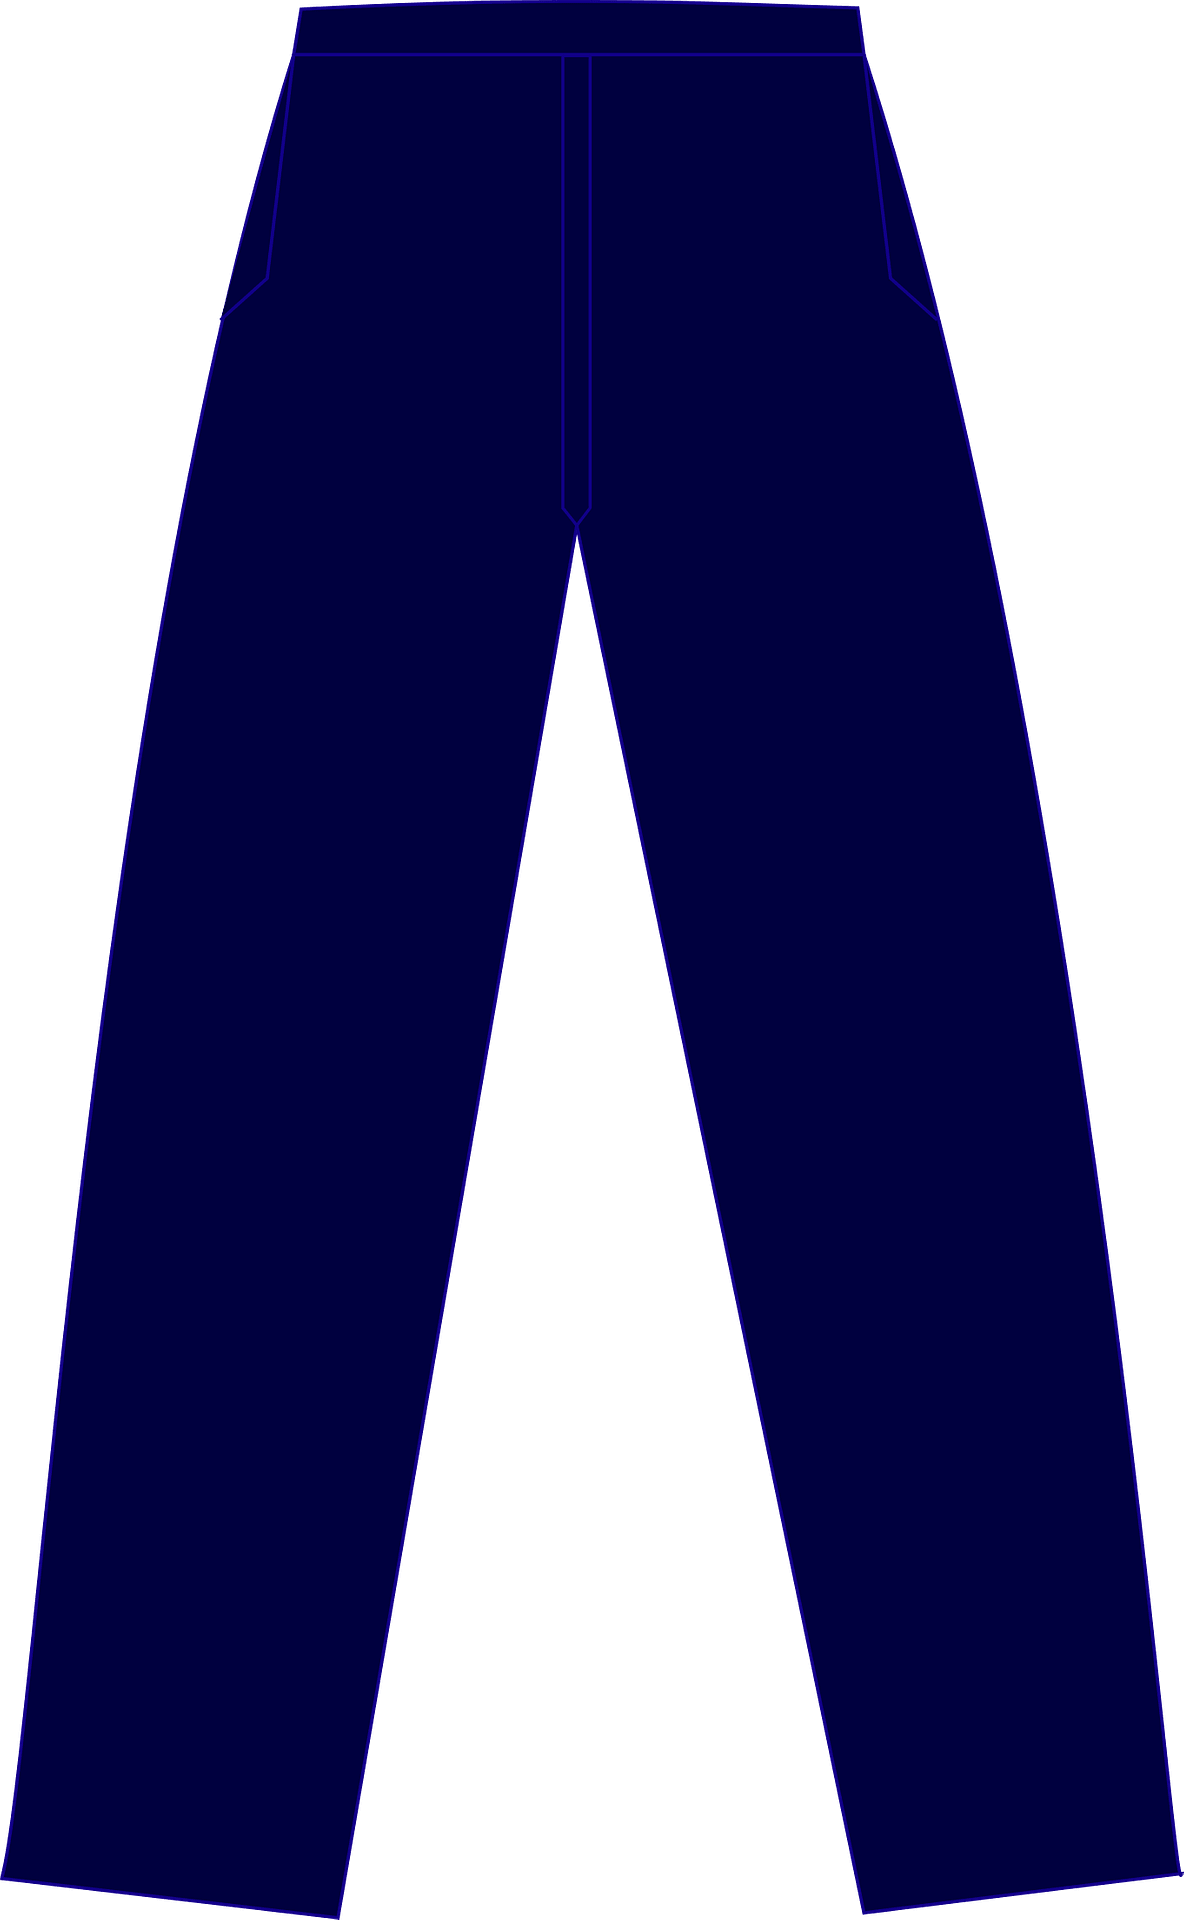 Pants clipart free images jpg - Clipart Library - Clip Art Library